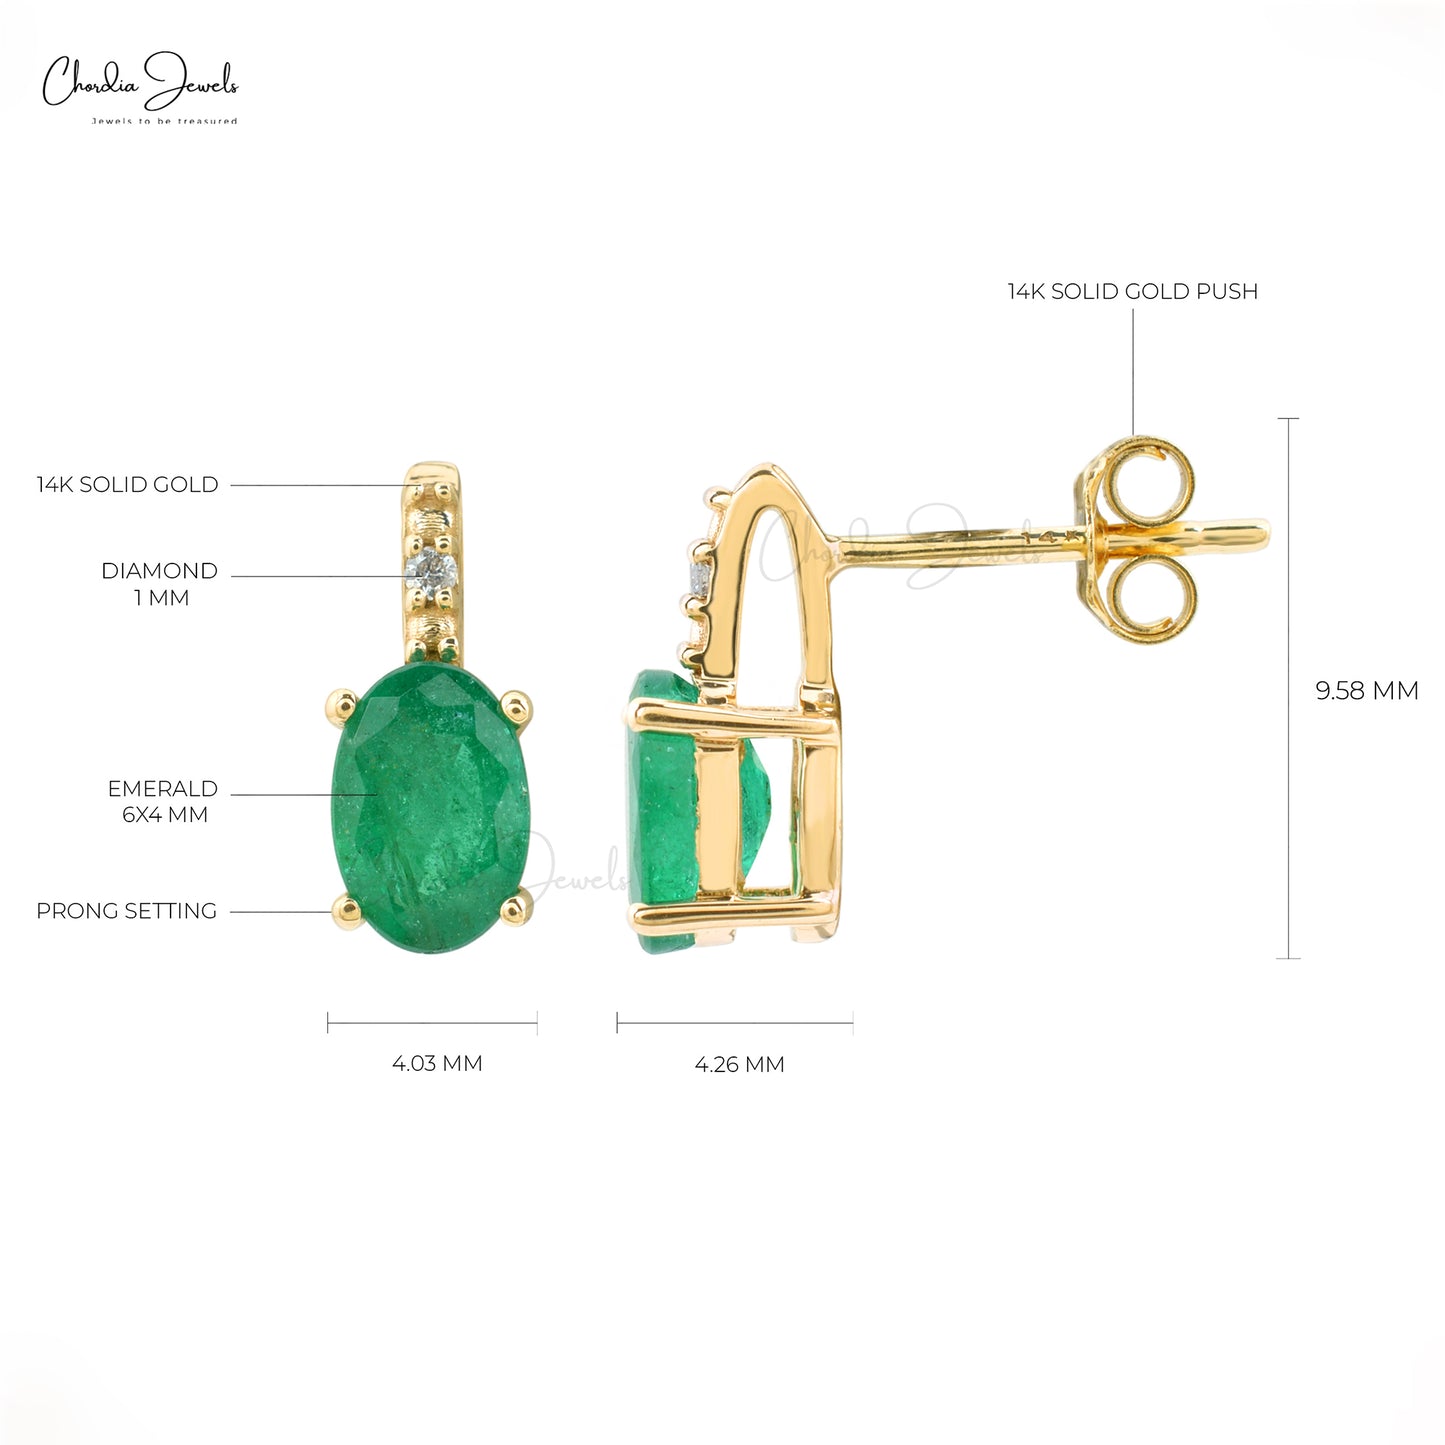 Find perfect finishing touch with our oval emerald earrings.